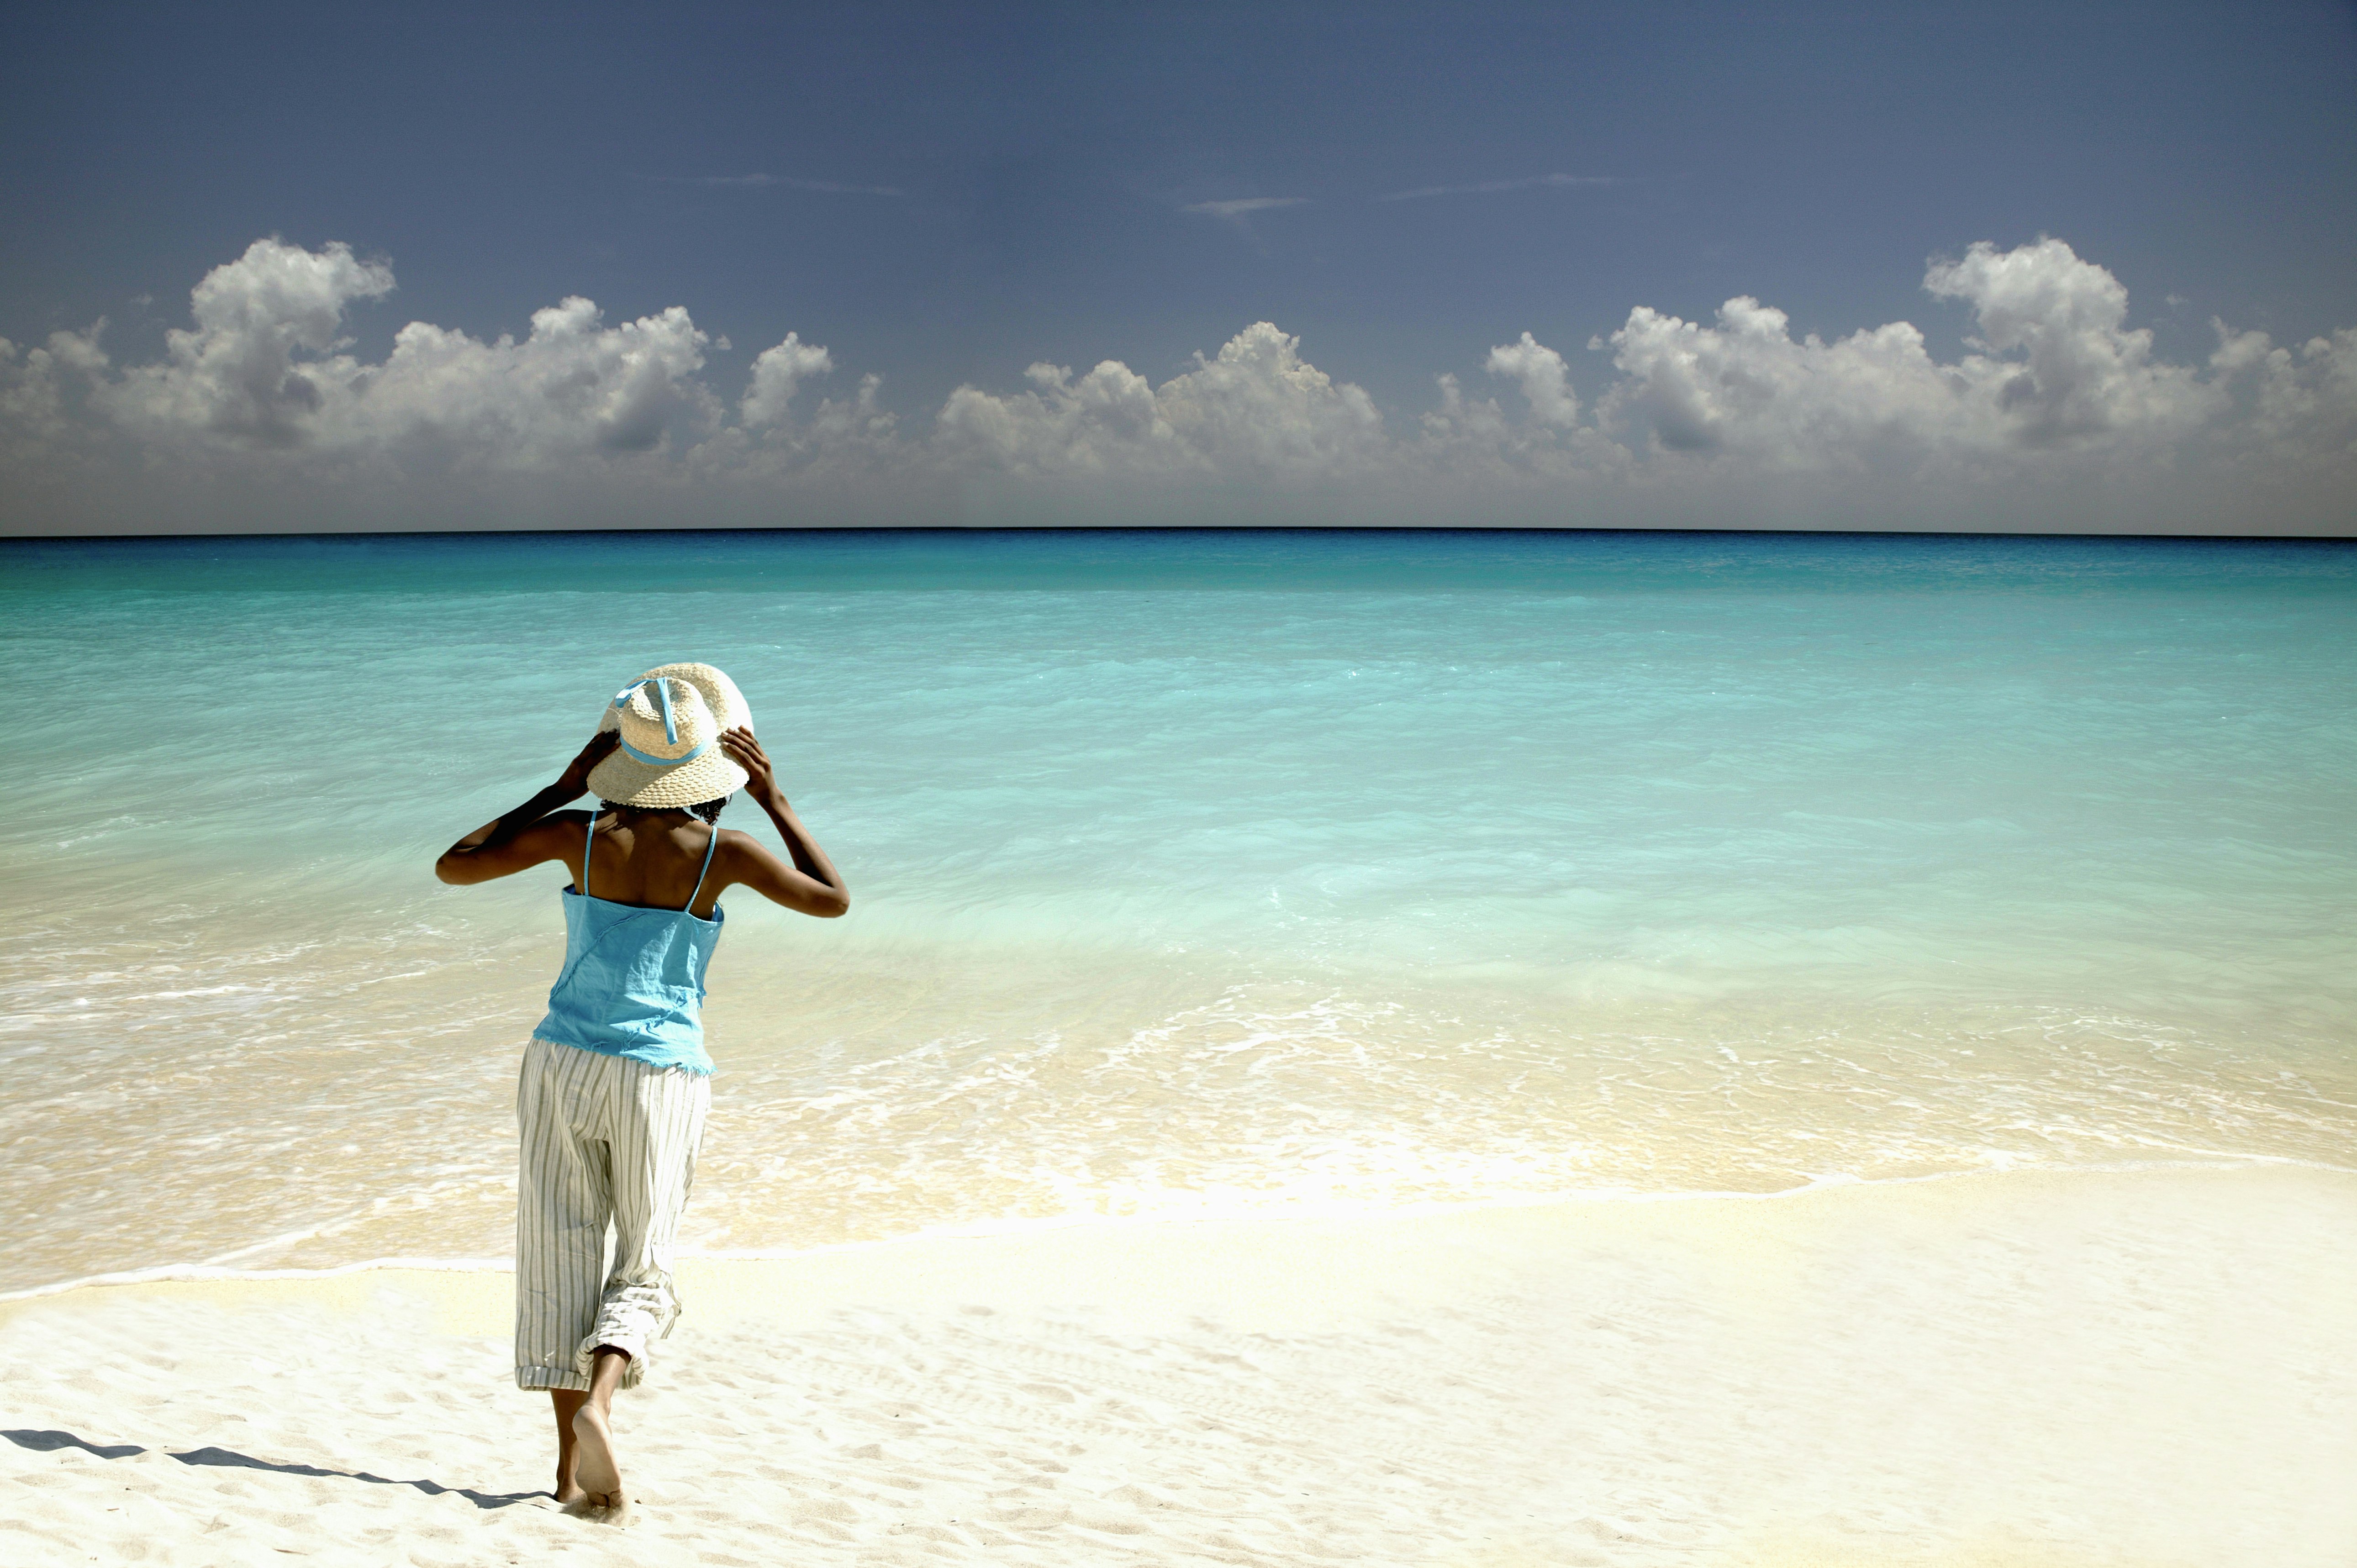 A woman wearing hat on a white-sand beach with turquoise water, seen from behind